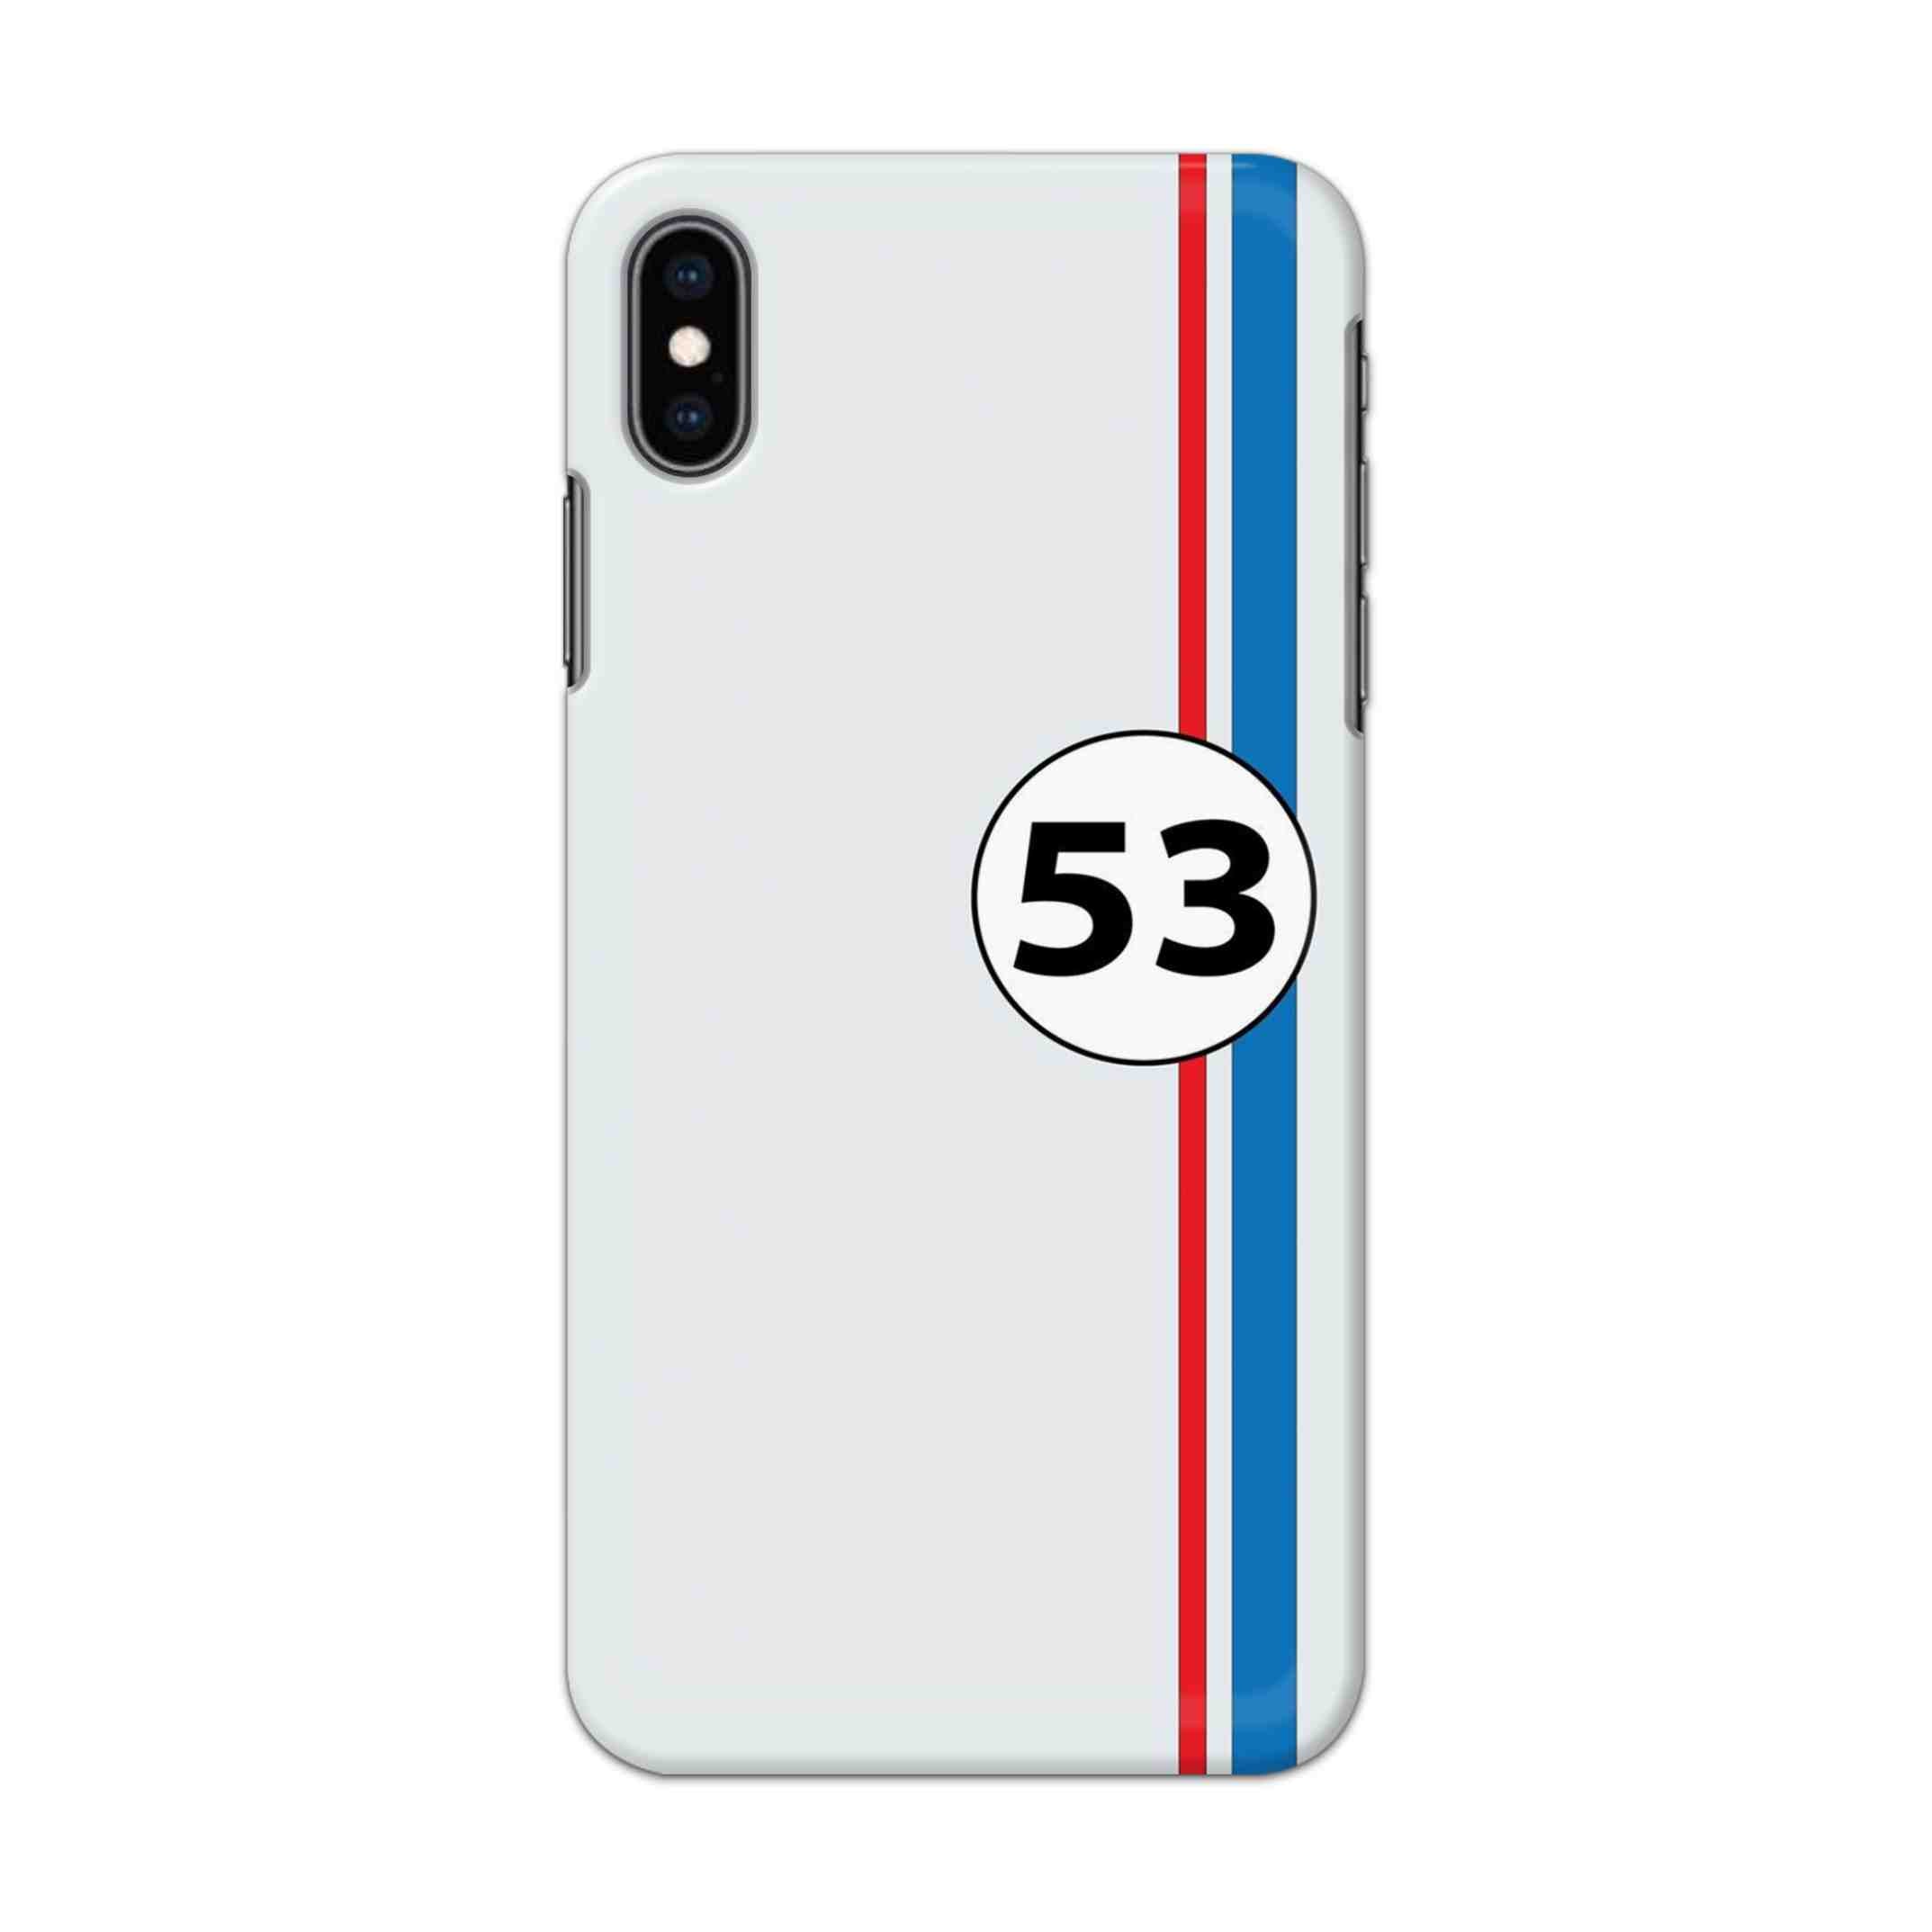 Buy 53 Hard Back Mobile Phone Case/Cover For iPhone XS MAX Online